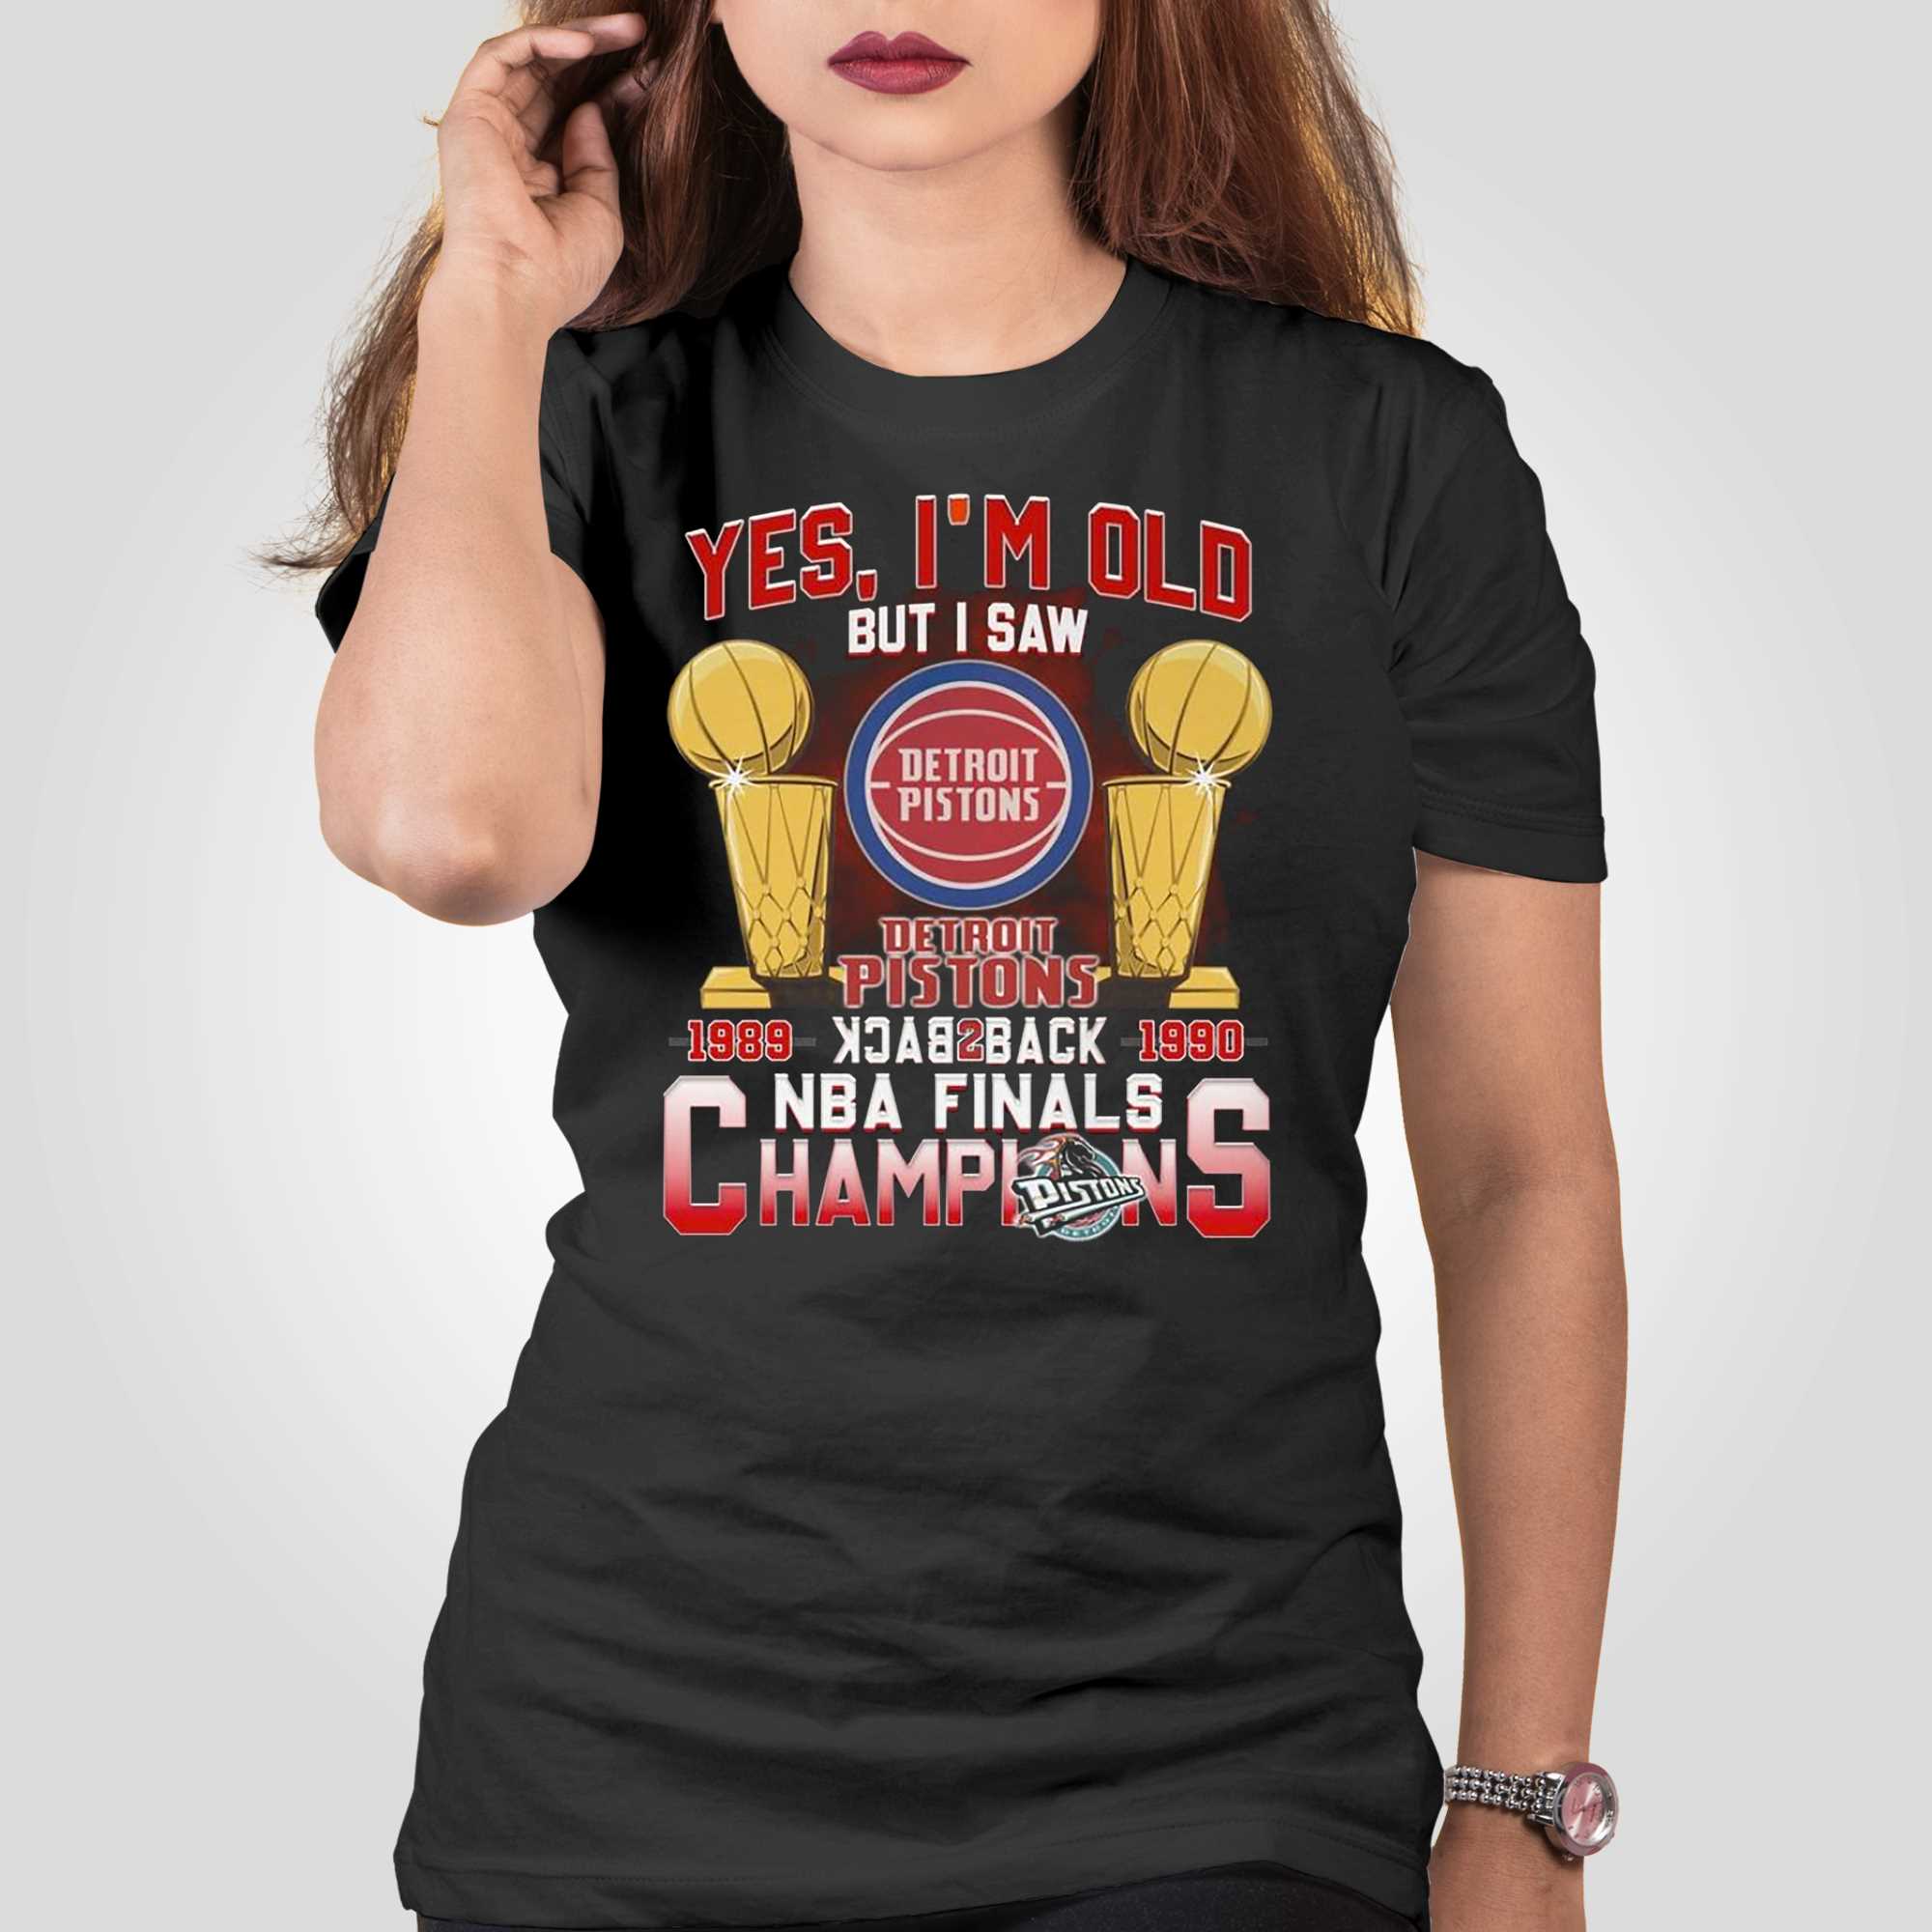 Just wanted to show off this shirt I found : r/DetroitPistons